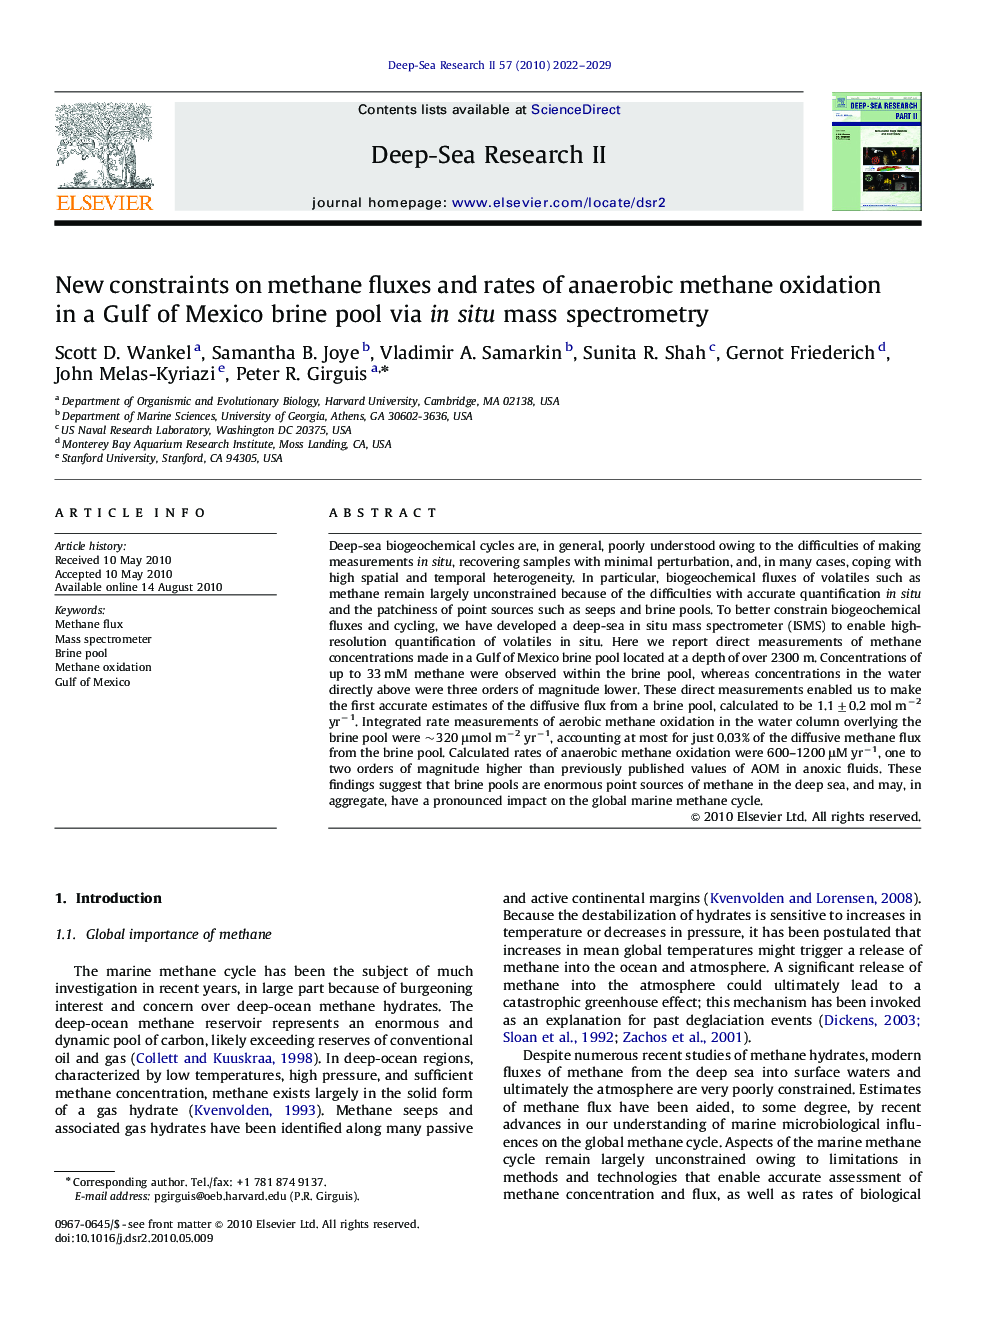 New constraints on methane fluxes and rates of anaerobic methane oxidation in a Gulf of Mexico brine pool via in situ mass spectrometry